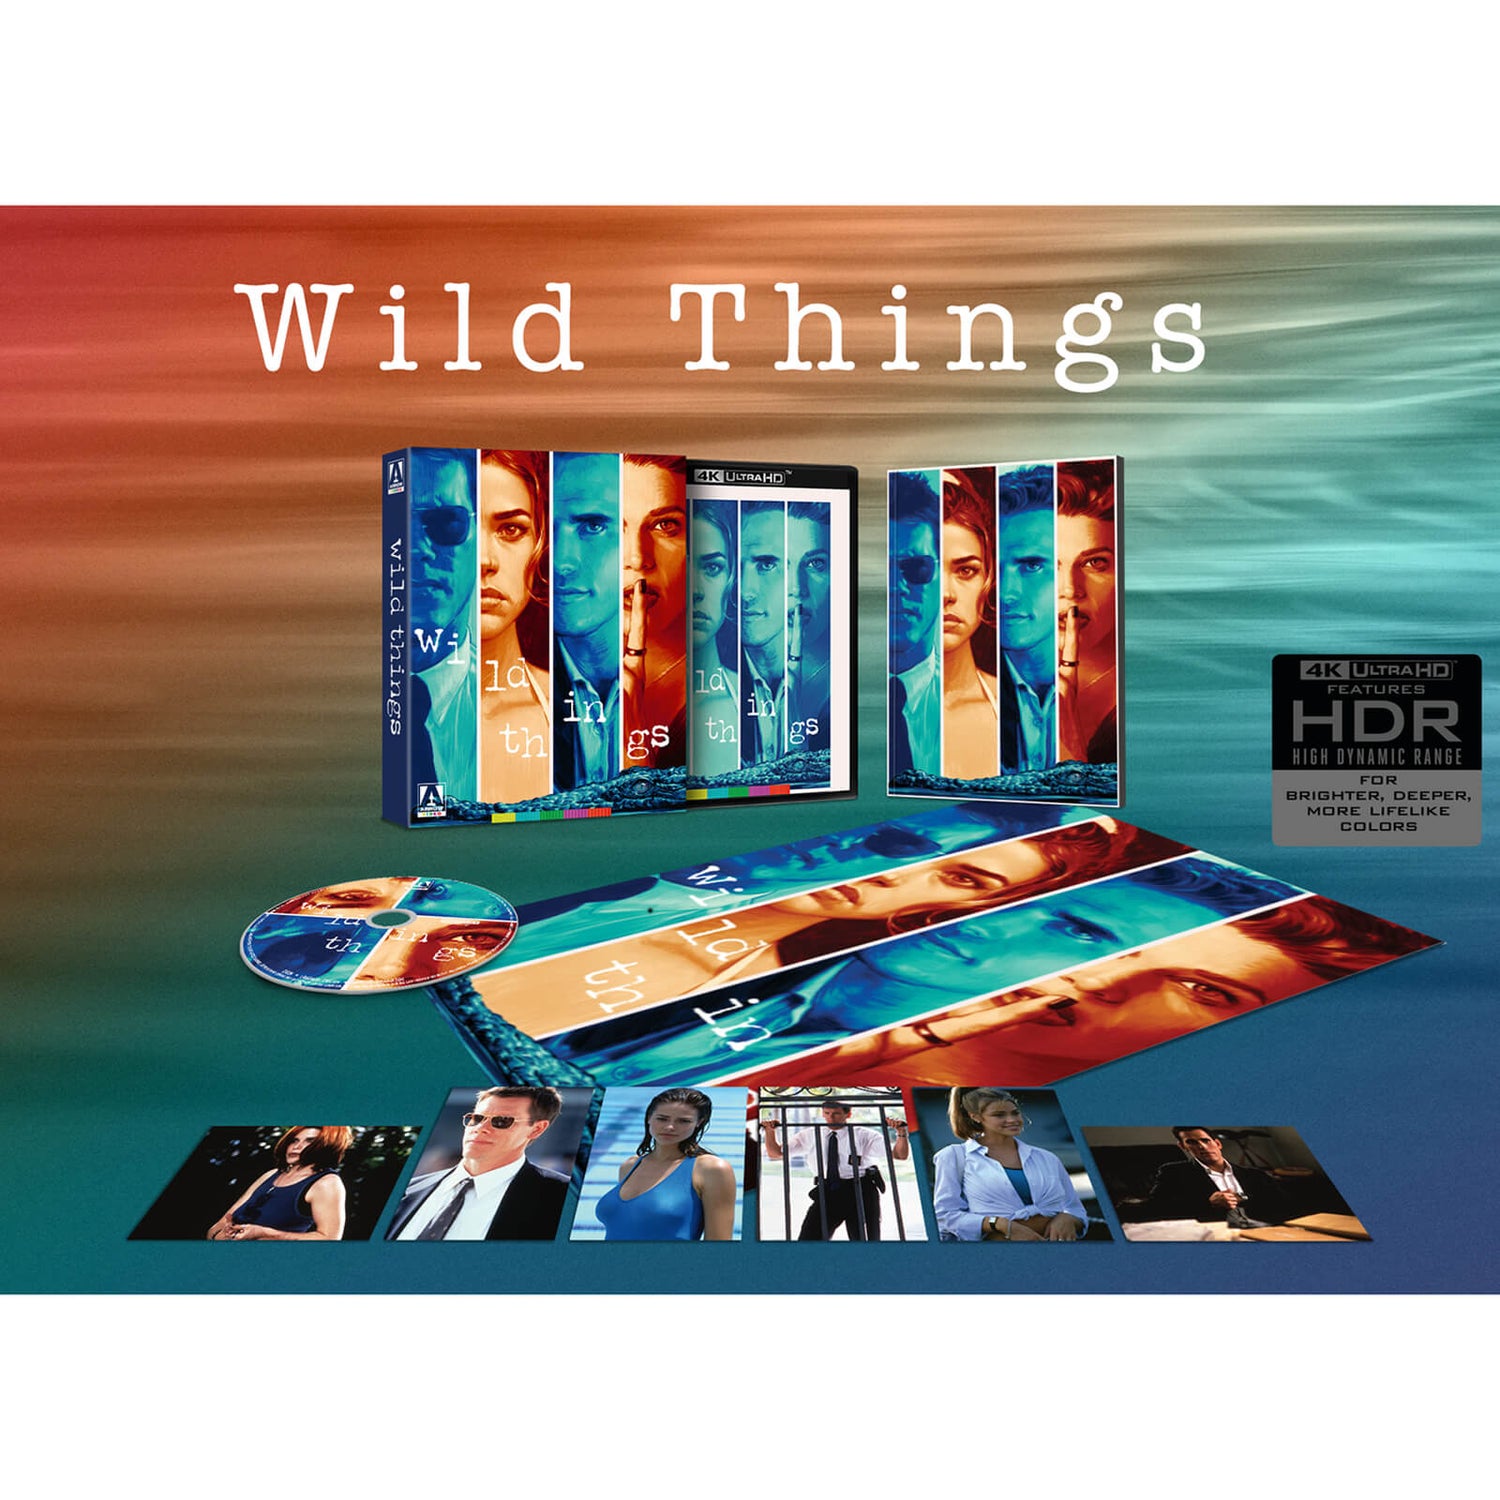 Wild Things Limited Edition 4K UHD Arrow Video US